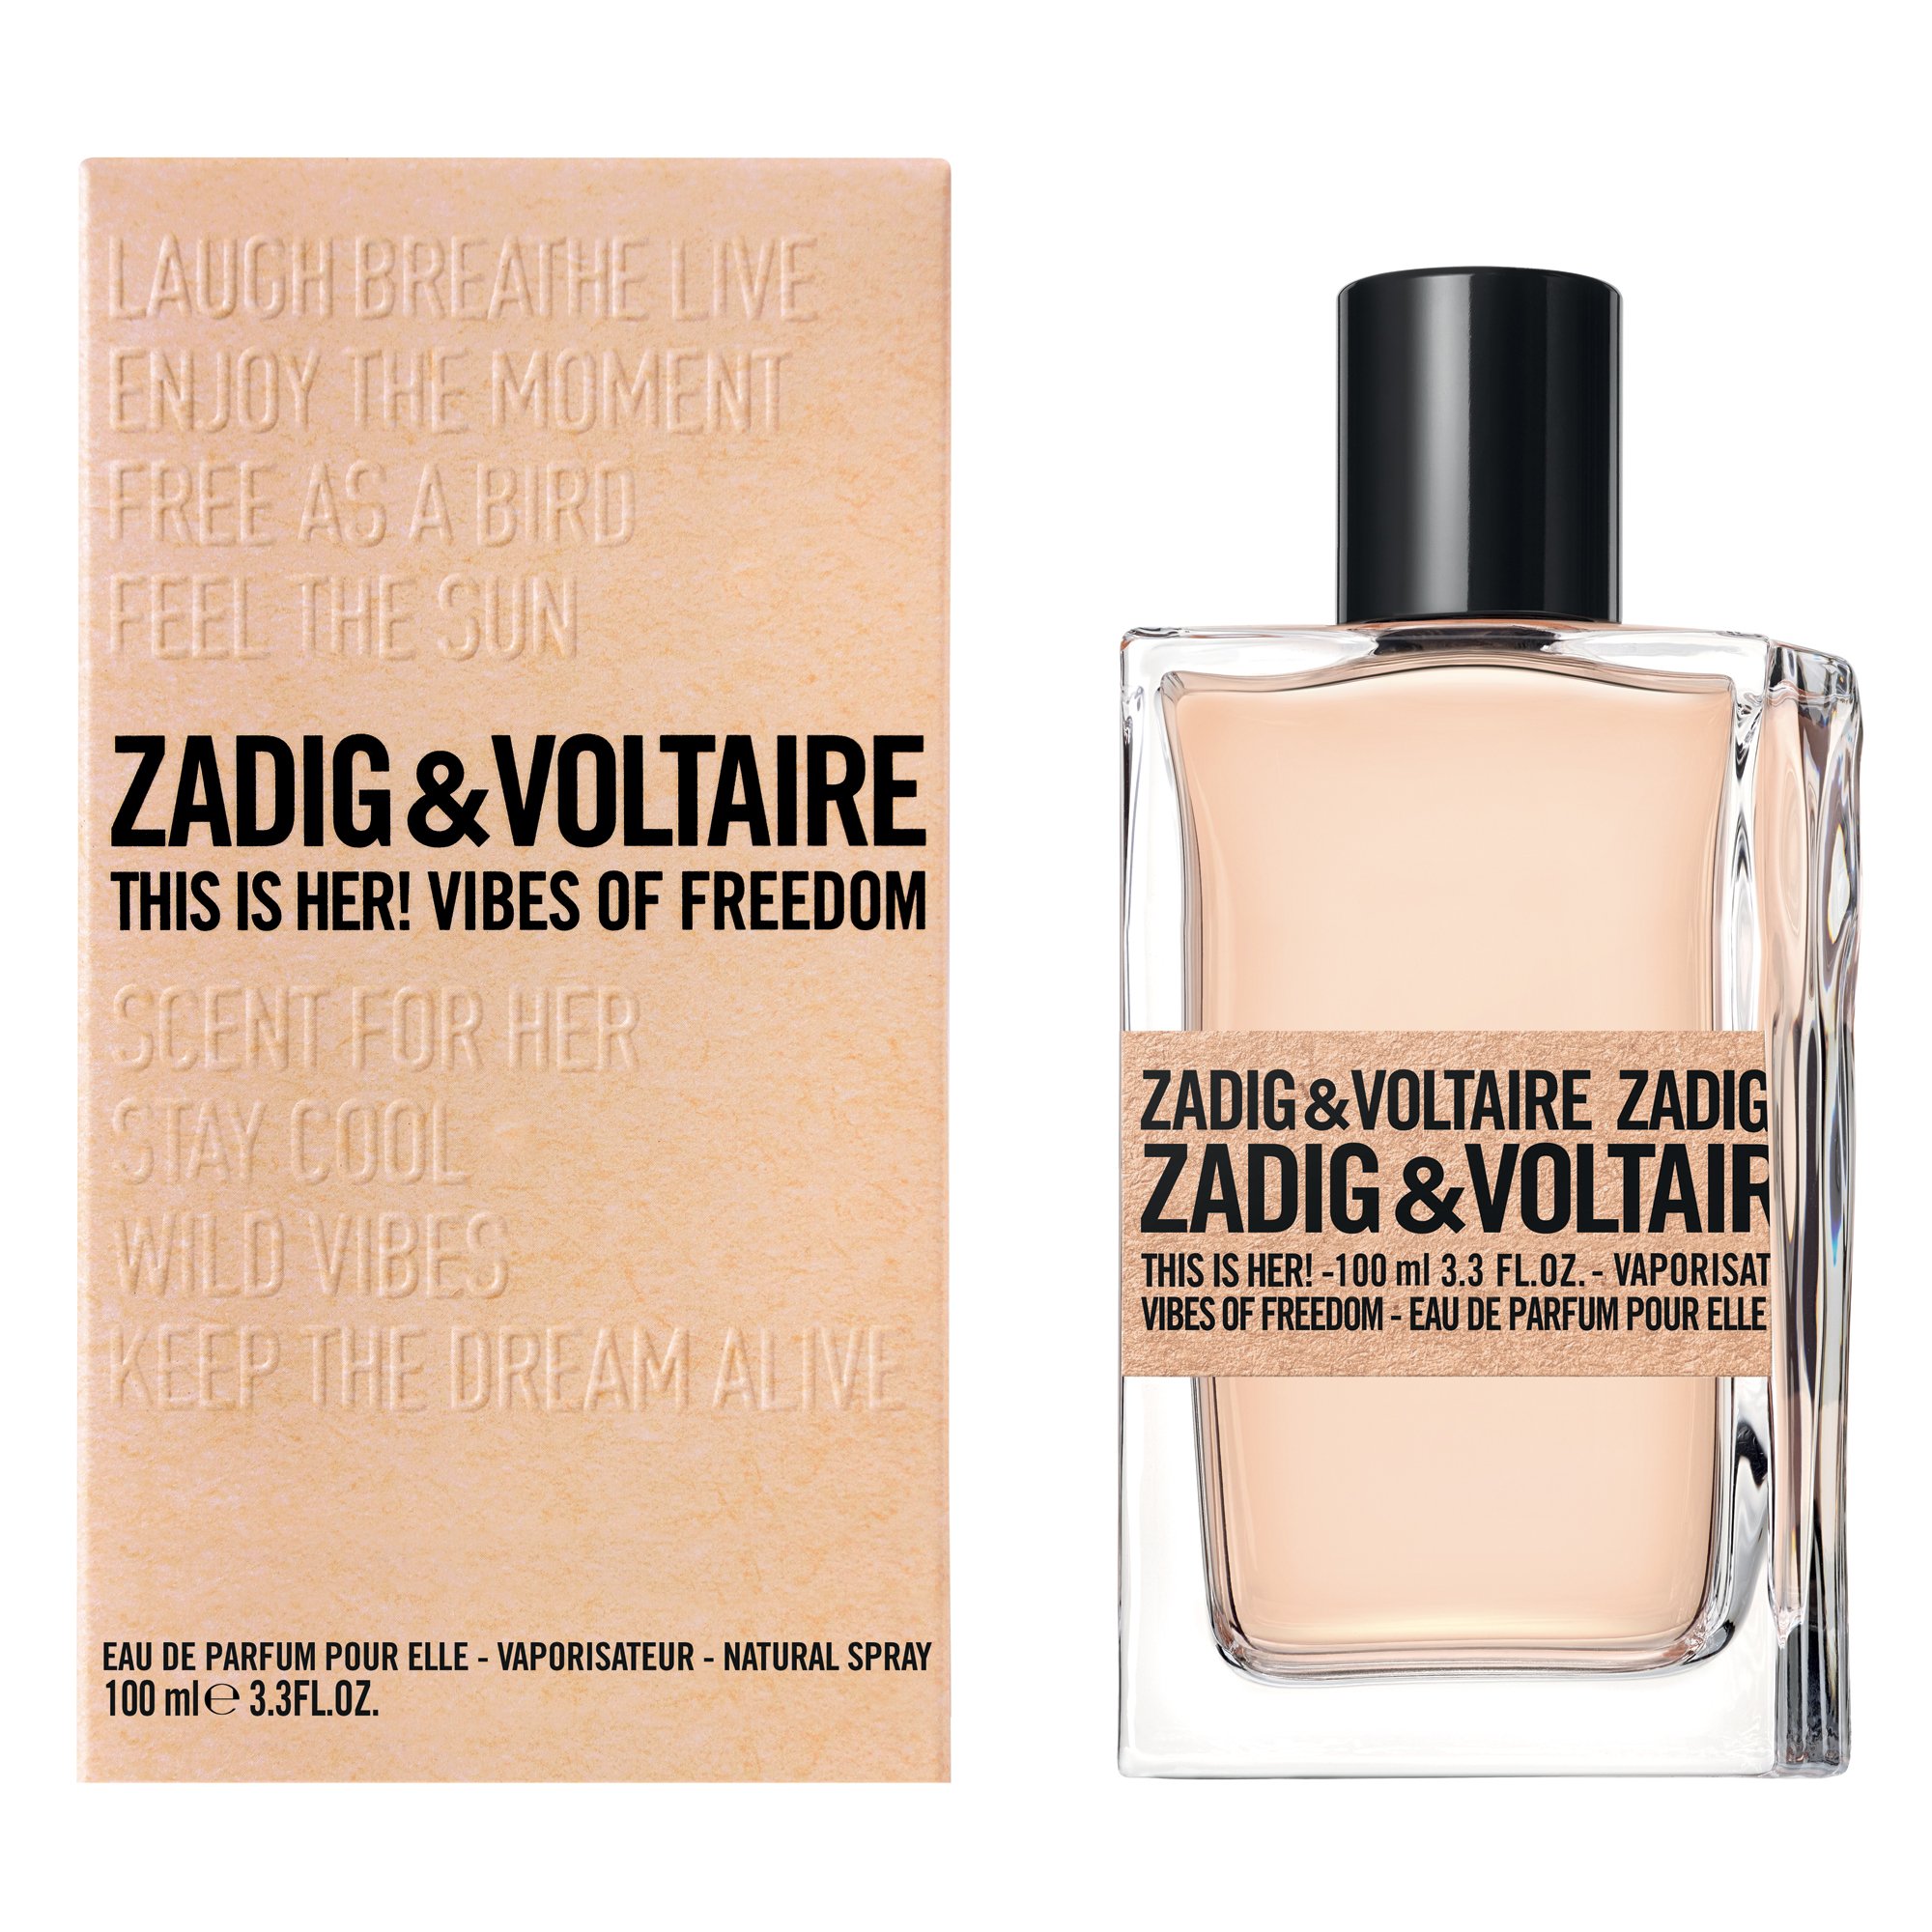 Vibes of freedom. Духи Zadig Voltaire Vibes of Freedom. Туалетная вода Zadig Voltaire для женщин. Zadig & Voltaire this is her! Vibes of Freedom EDP (100 мл, тестер). Духи Zadig Voltaire this is her.